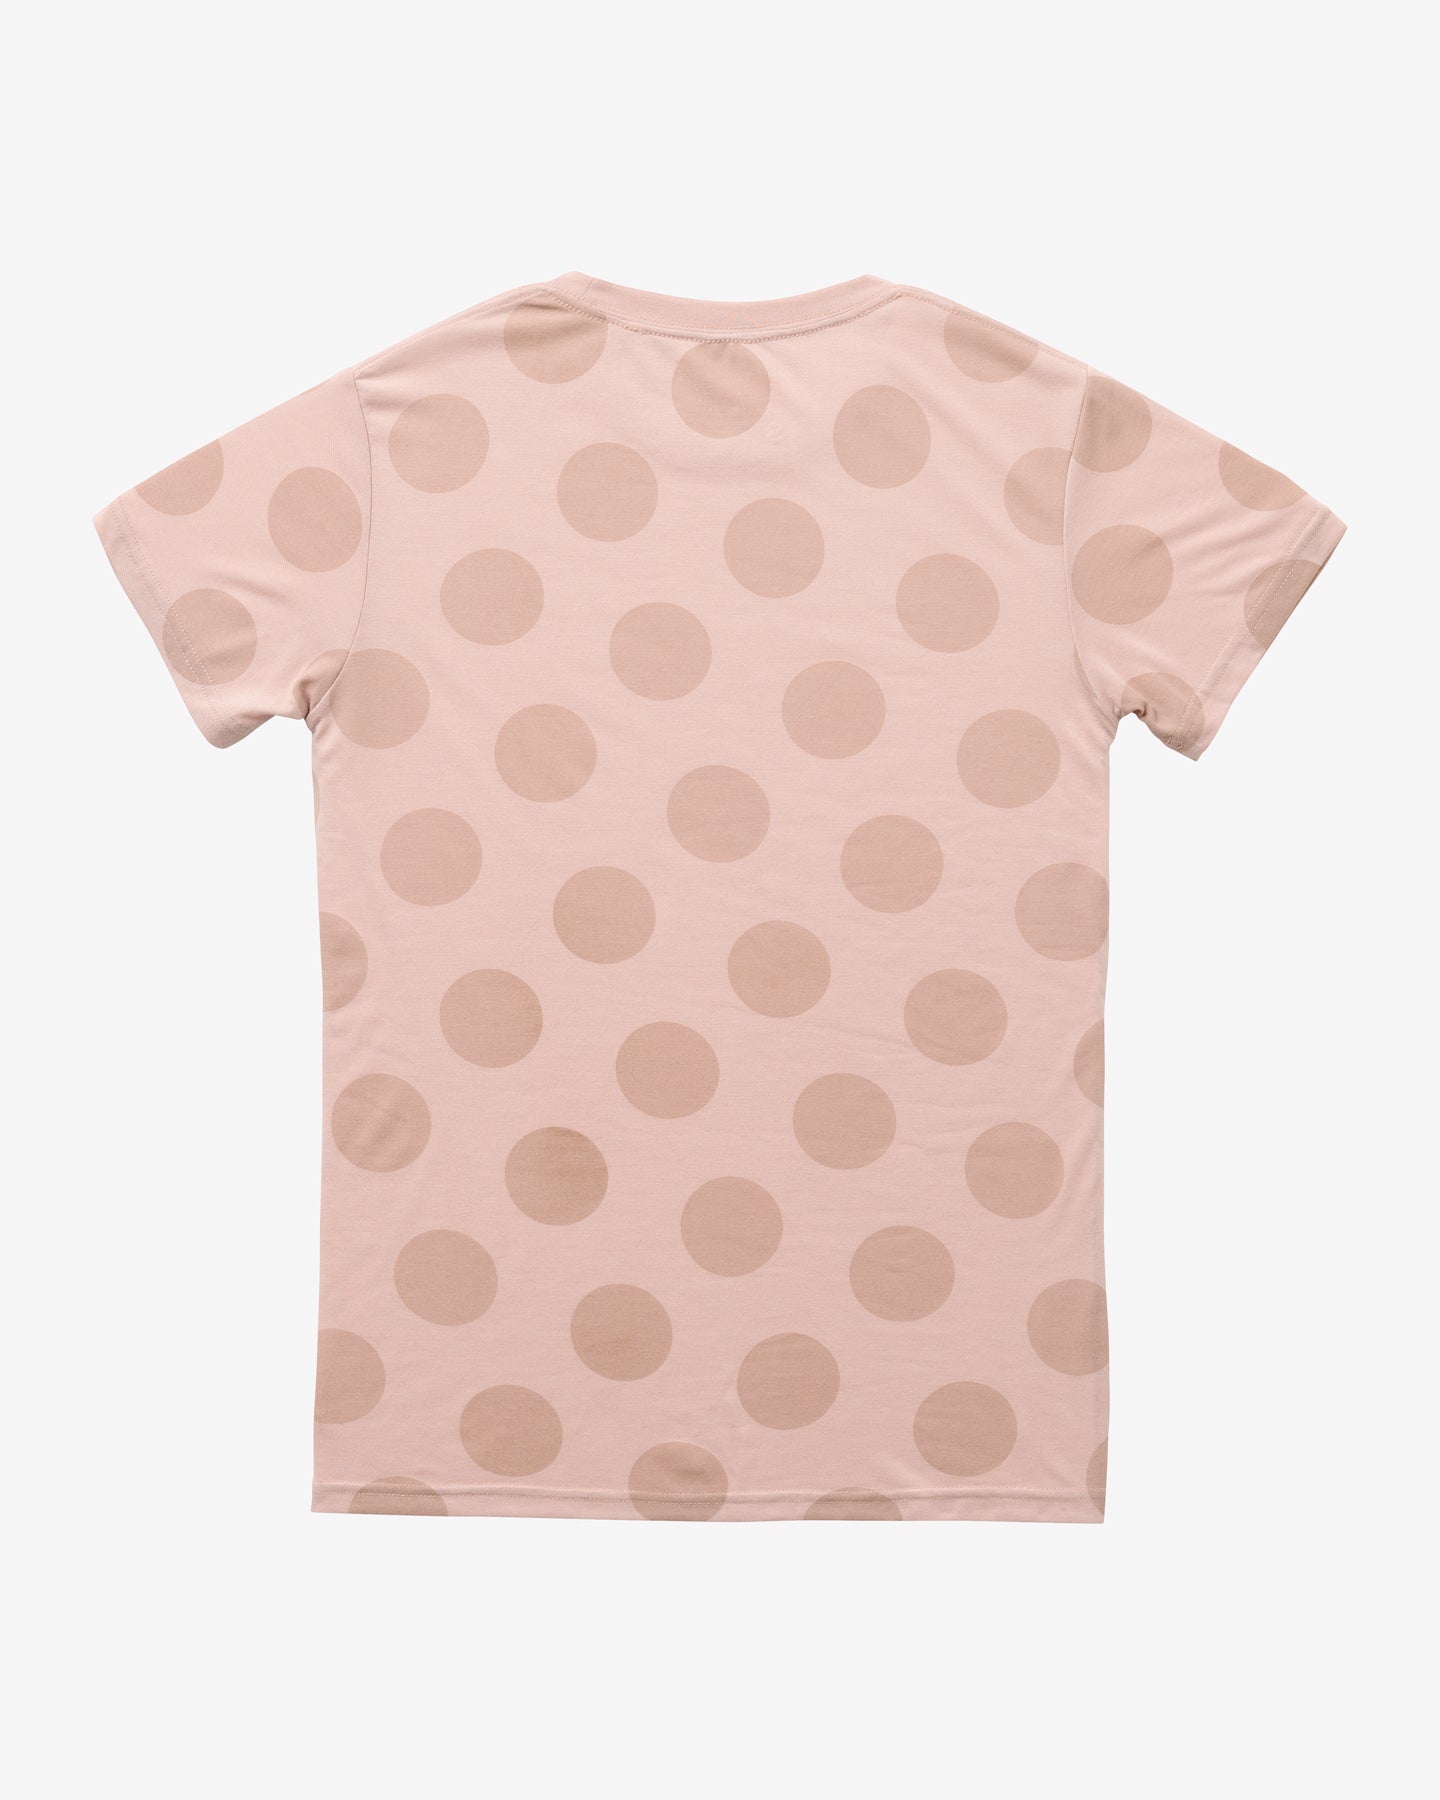 Pink with Black Dots Shirt Extender - DEMDACO Retailers